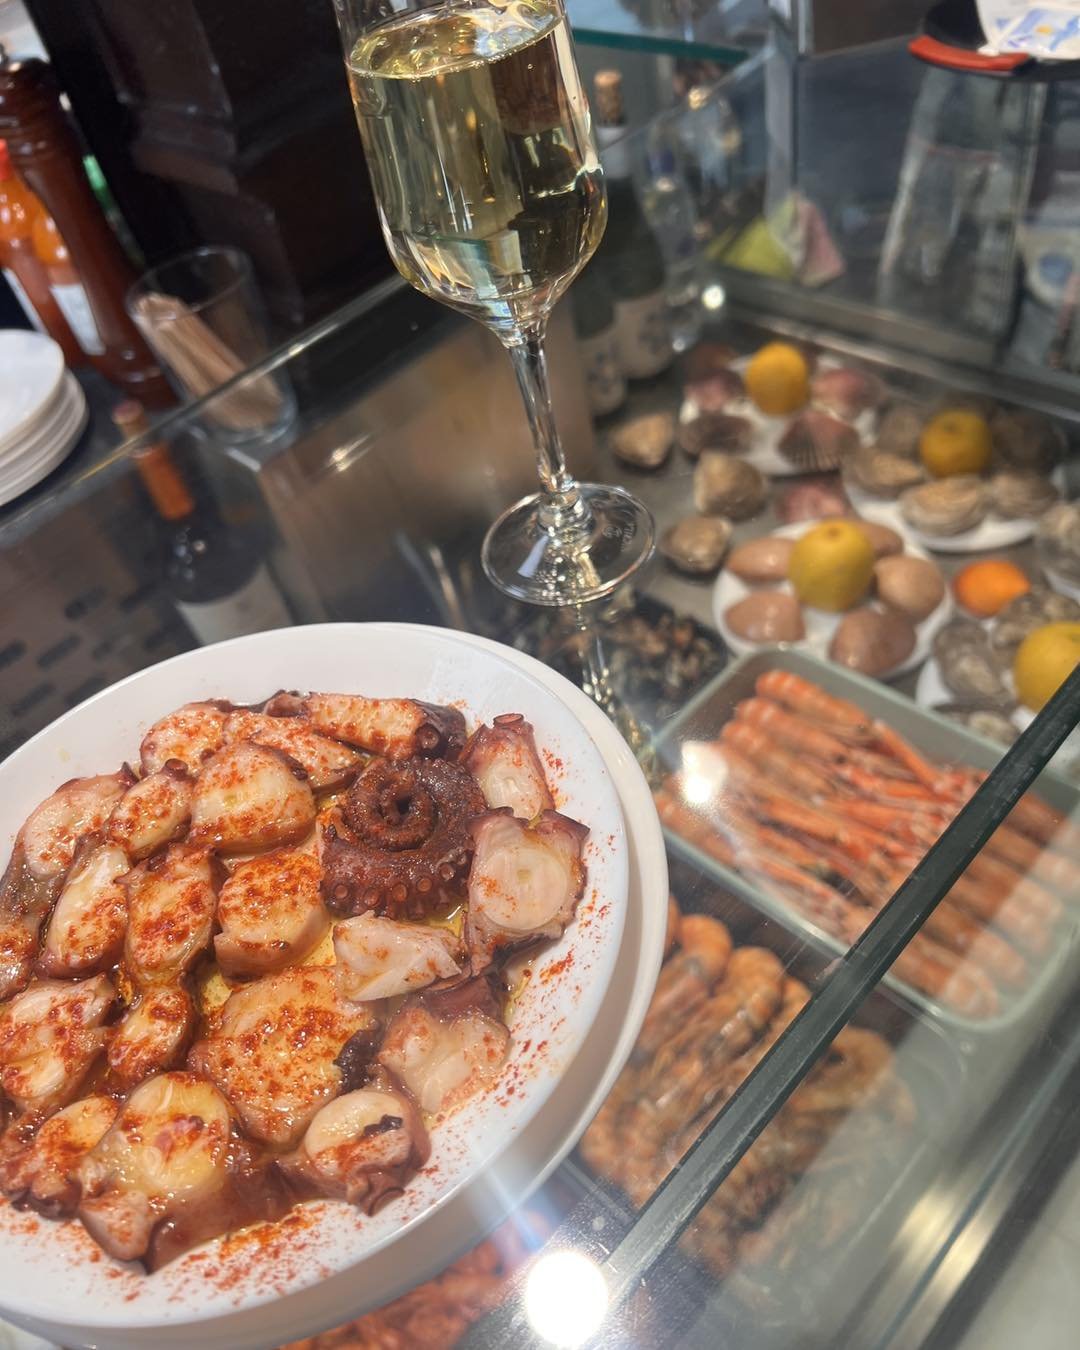 I had the best time eating my way around Madrid! Got lots of inspiration and ate all the seafood 
🦐🫒🍷